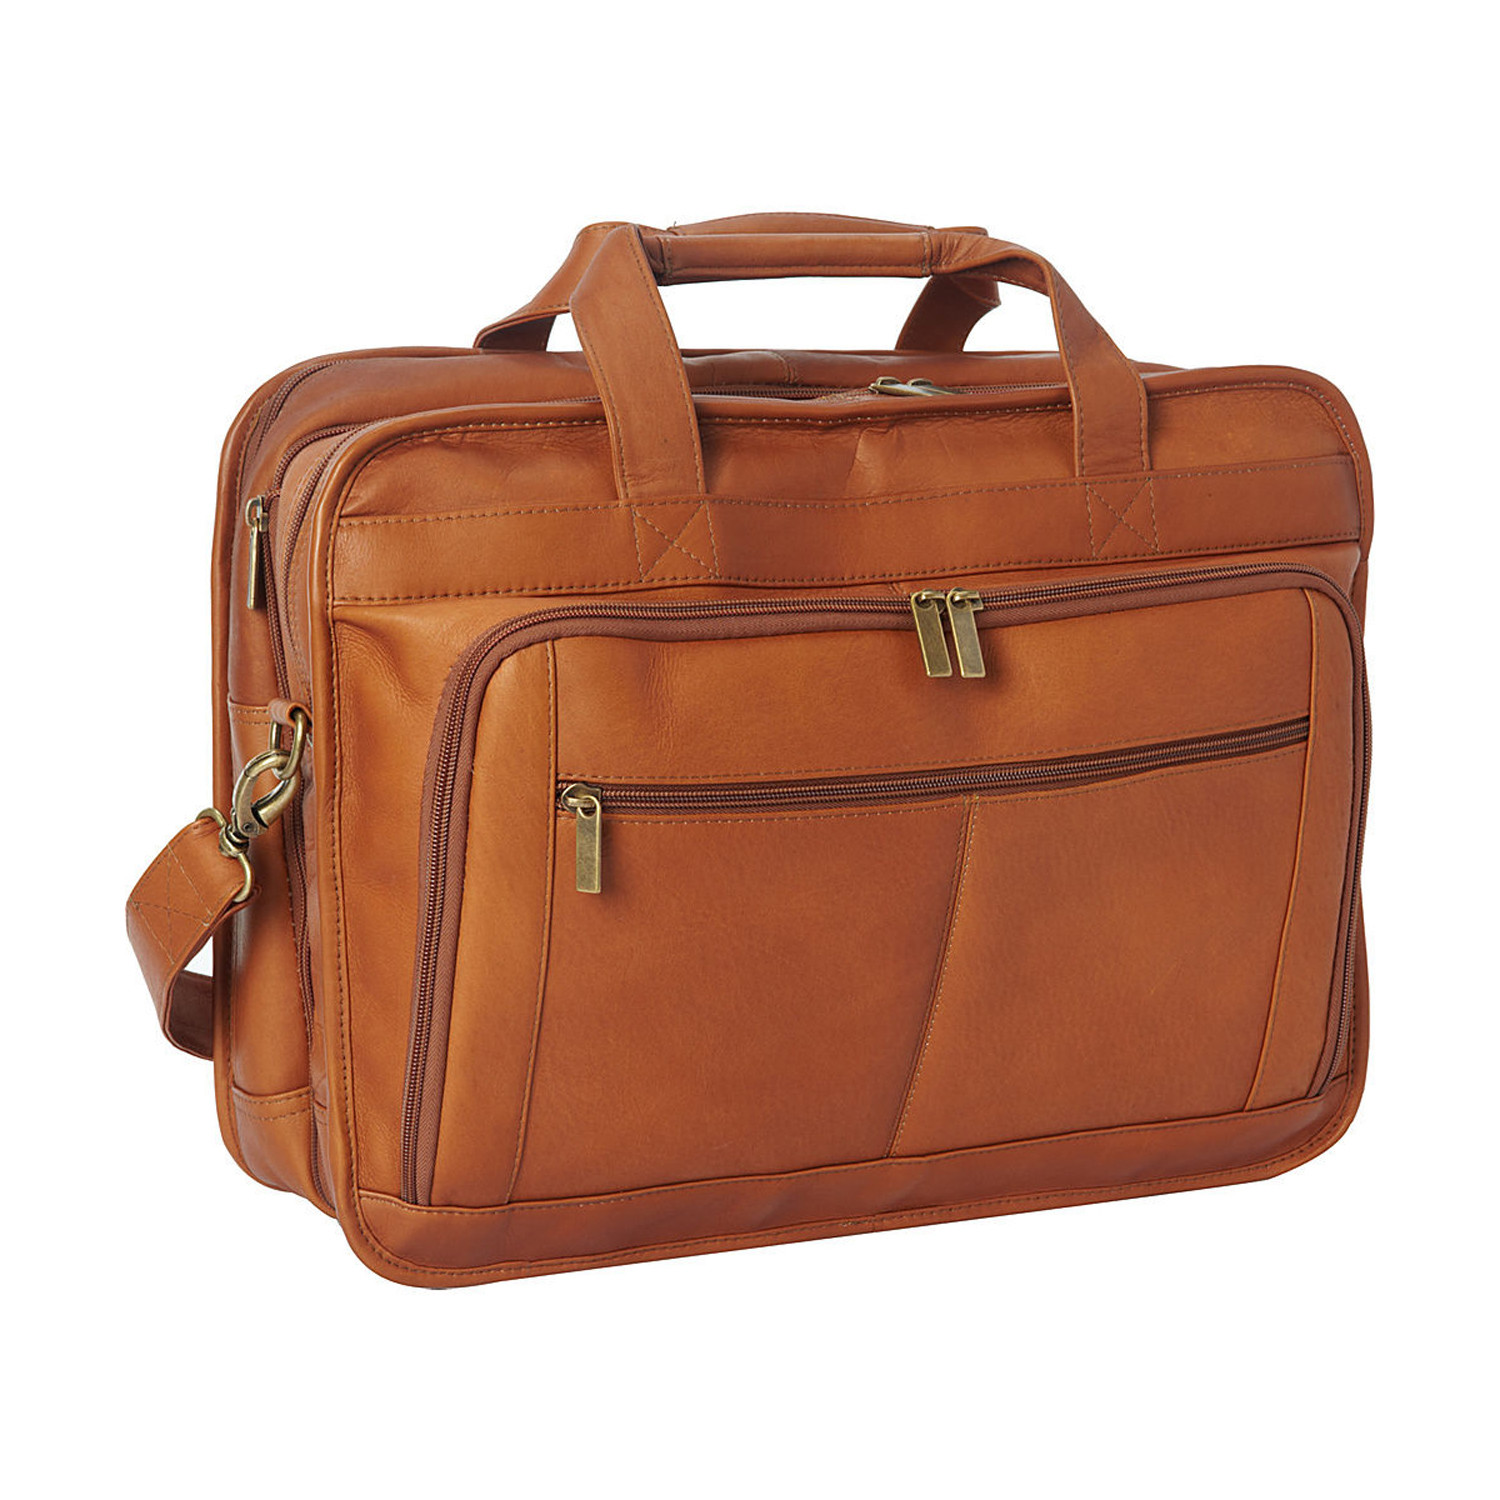 Everyday Briefcase (Black) - Rio Rancho Leather Inc. - Touch of Modern